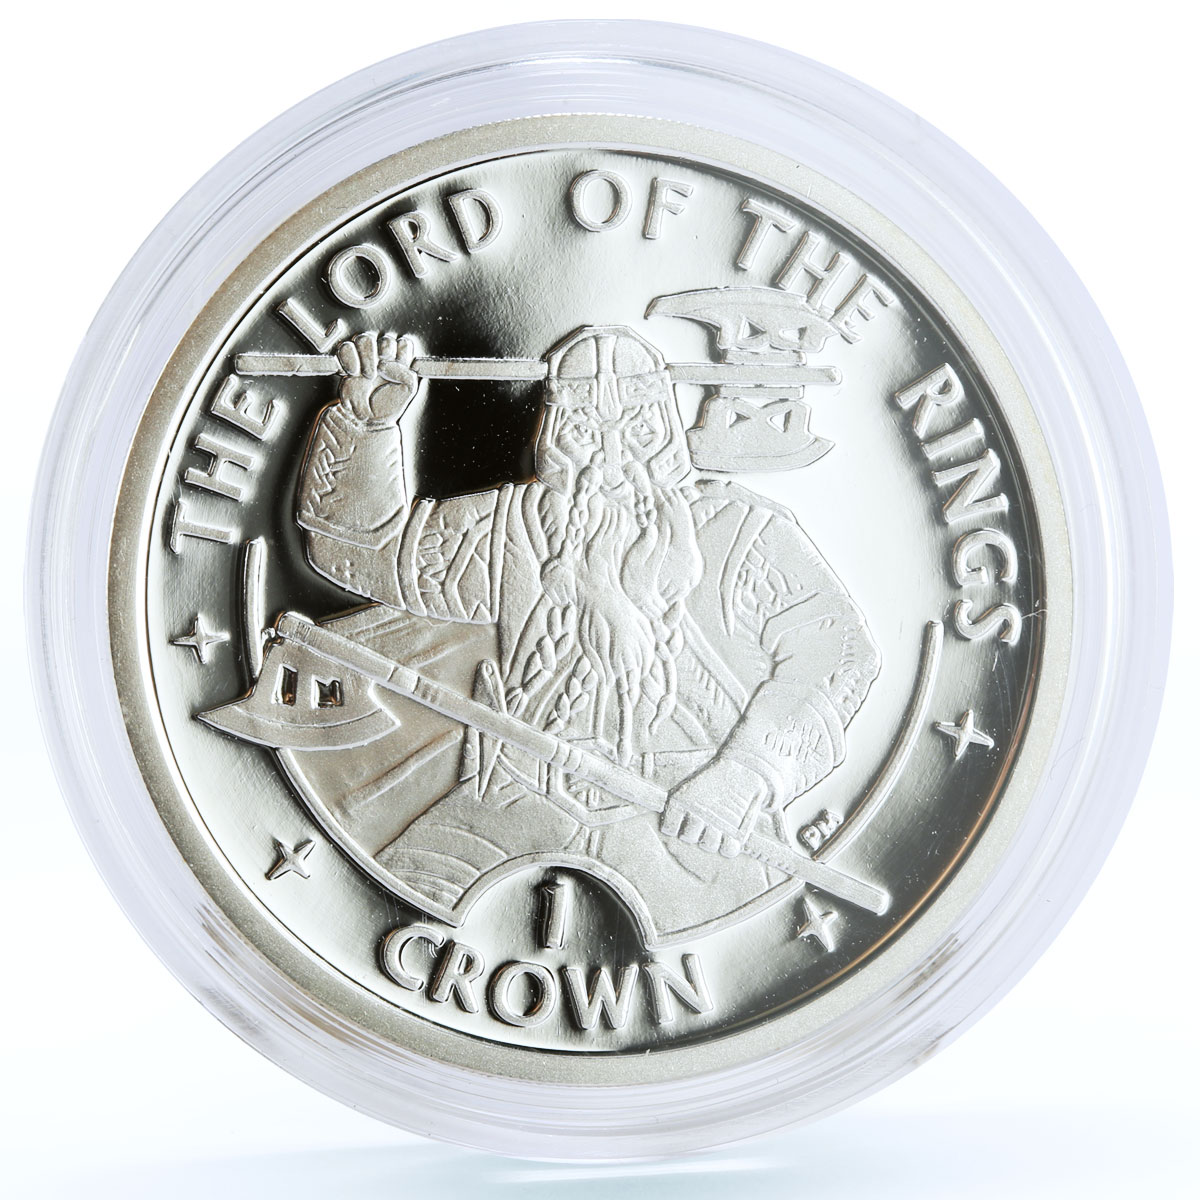 Isle of Man 1 crown Lord of the Rings Gnome Warrior Gimli proof silver coin 2003